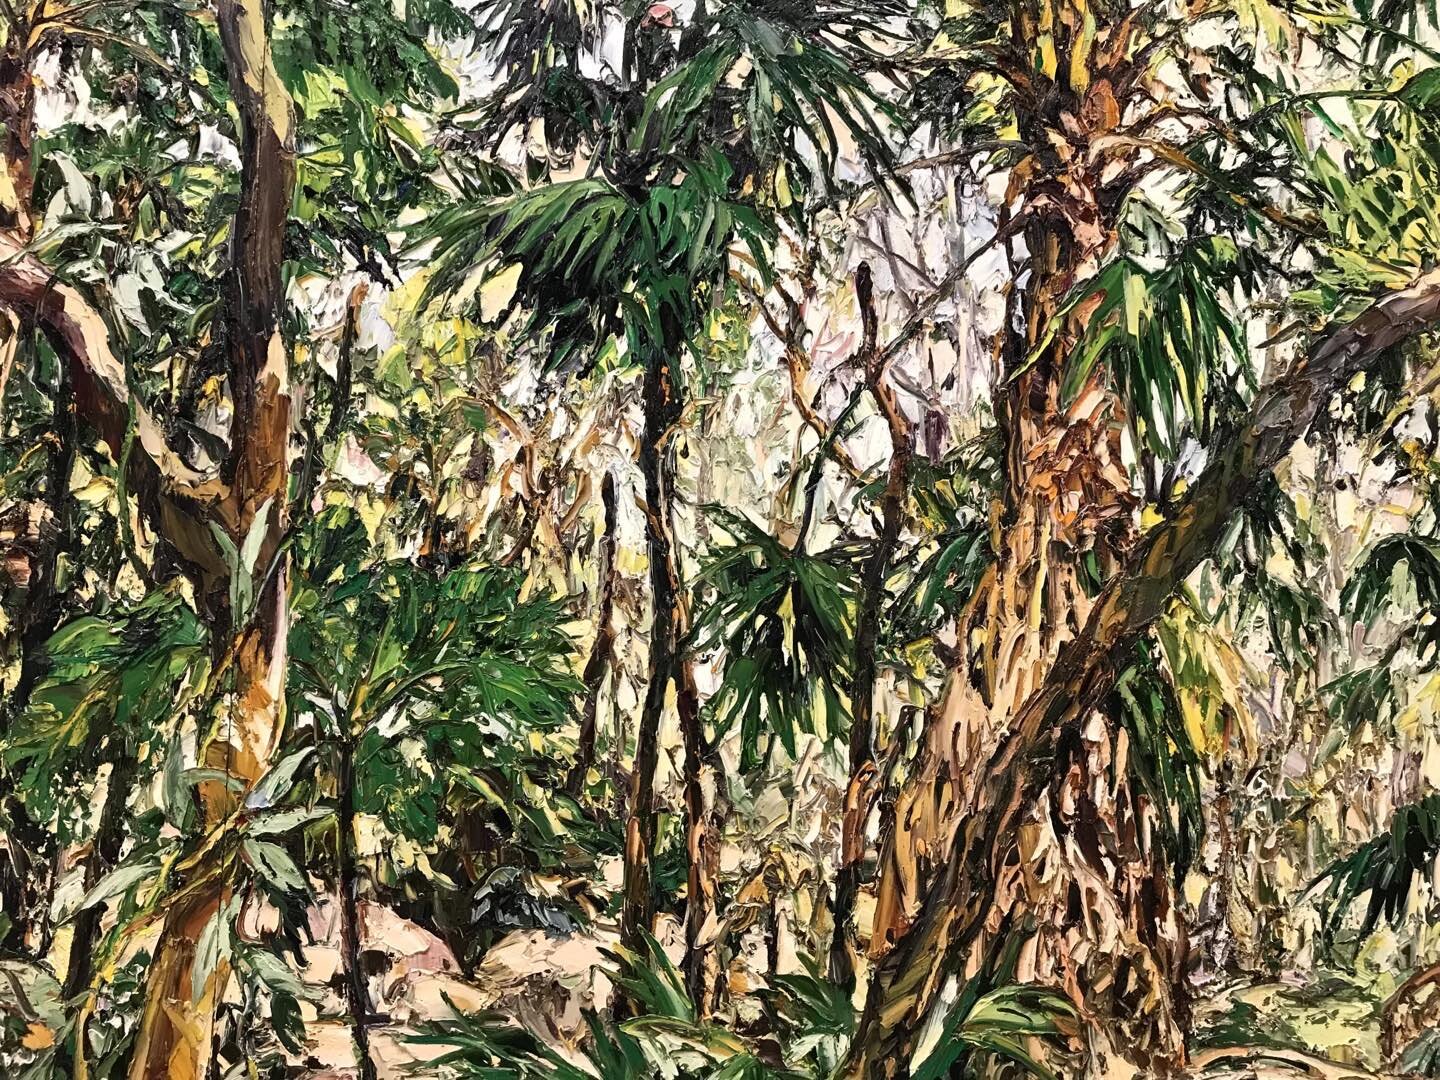 I was recently in Sydney and went to see the Archibald at the Art Gallery of NSW. This stunning artwork by Nicholas Harding called Eora took my breath away. It&rsquo;s the winner of the 2022 Wynne Prize; I spent almost as much time looking at, explor